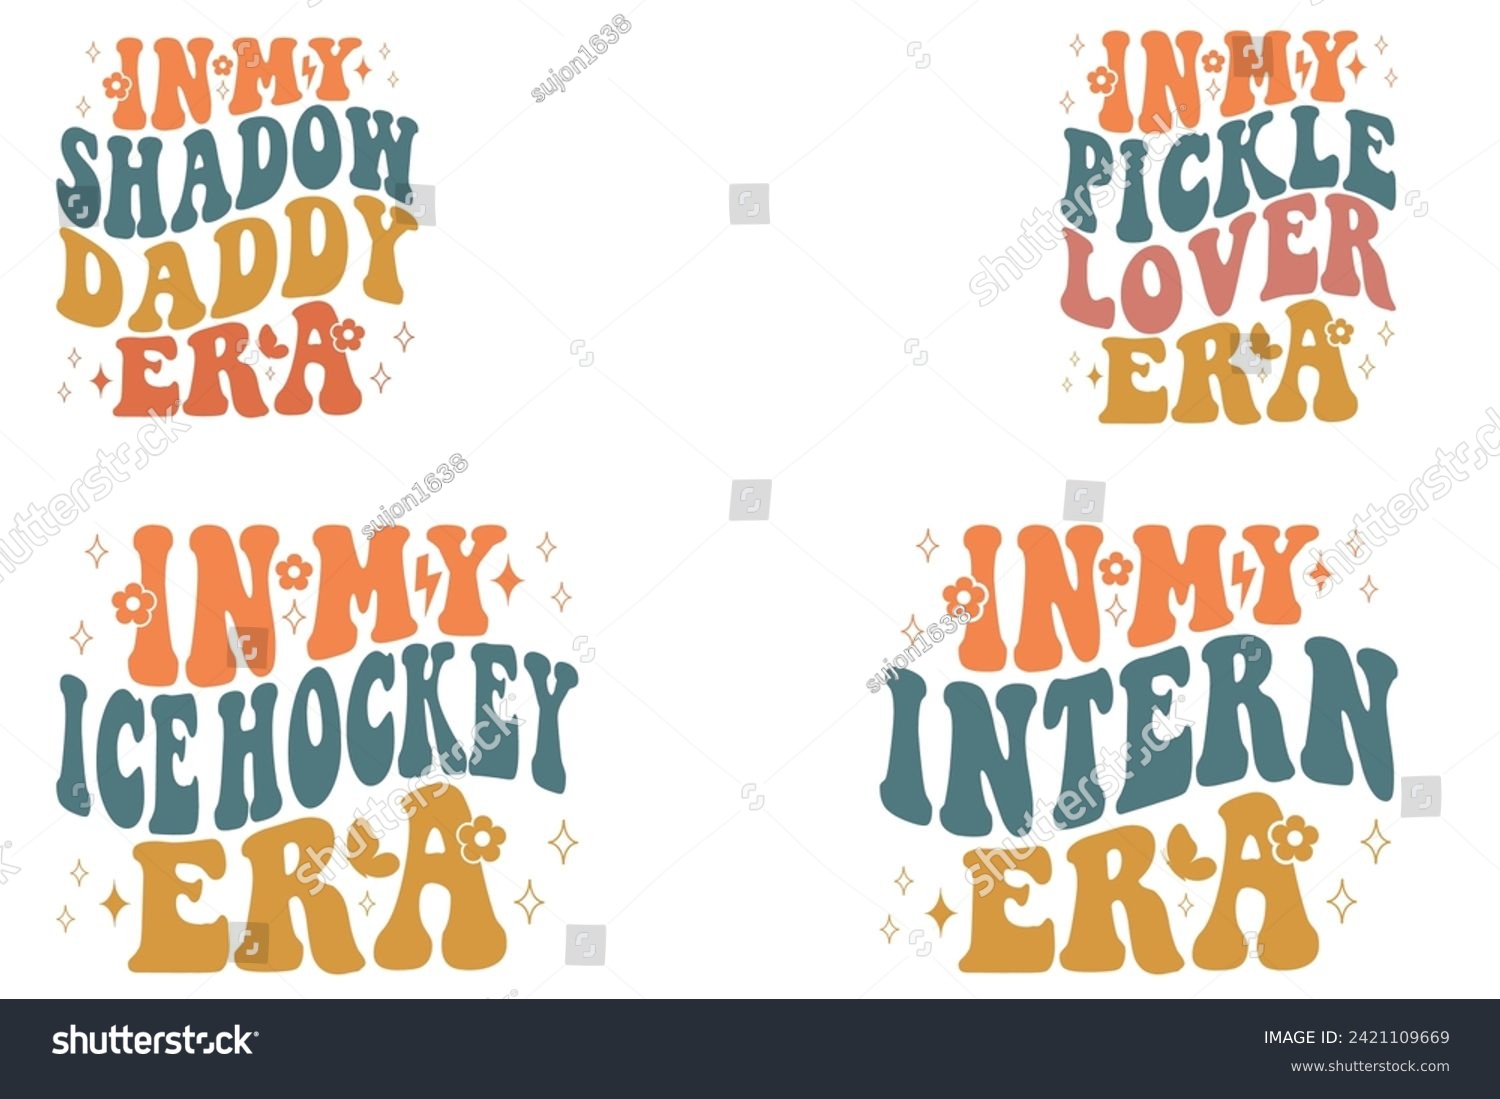 SVG of In My Shadow Daddy Era, In My Pickle Lover Era, In My Ice Hockey Era, In My Intern Era retro T-shirt svg